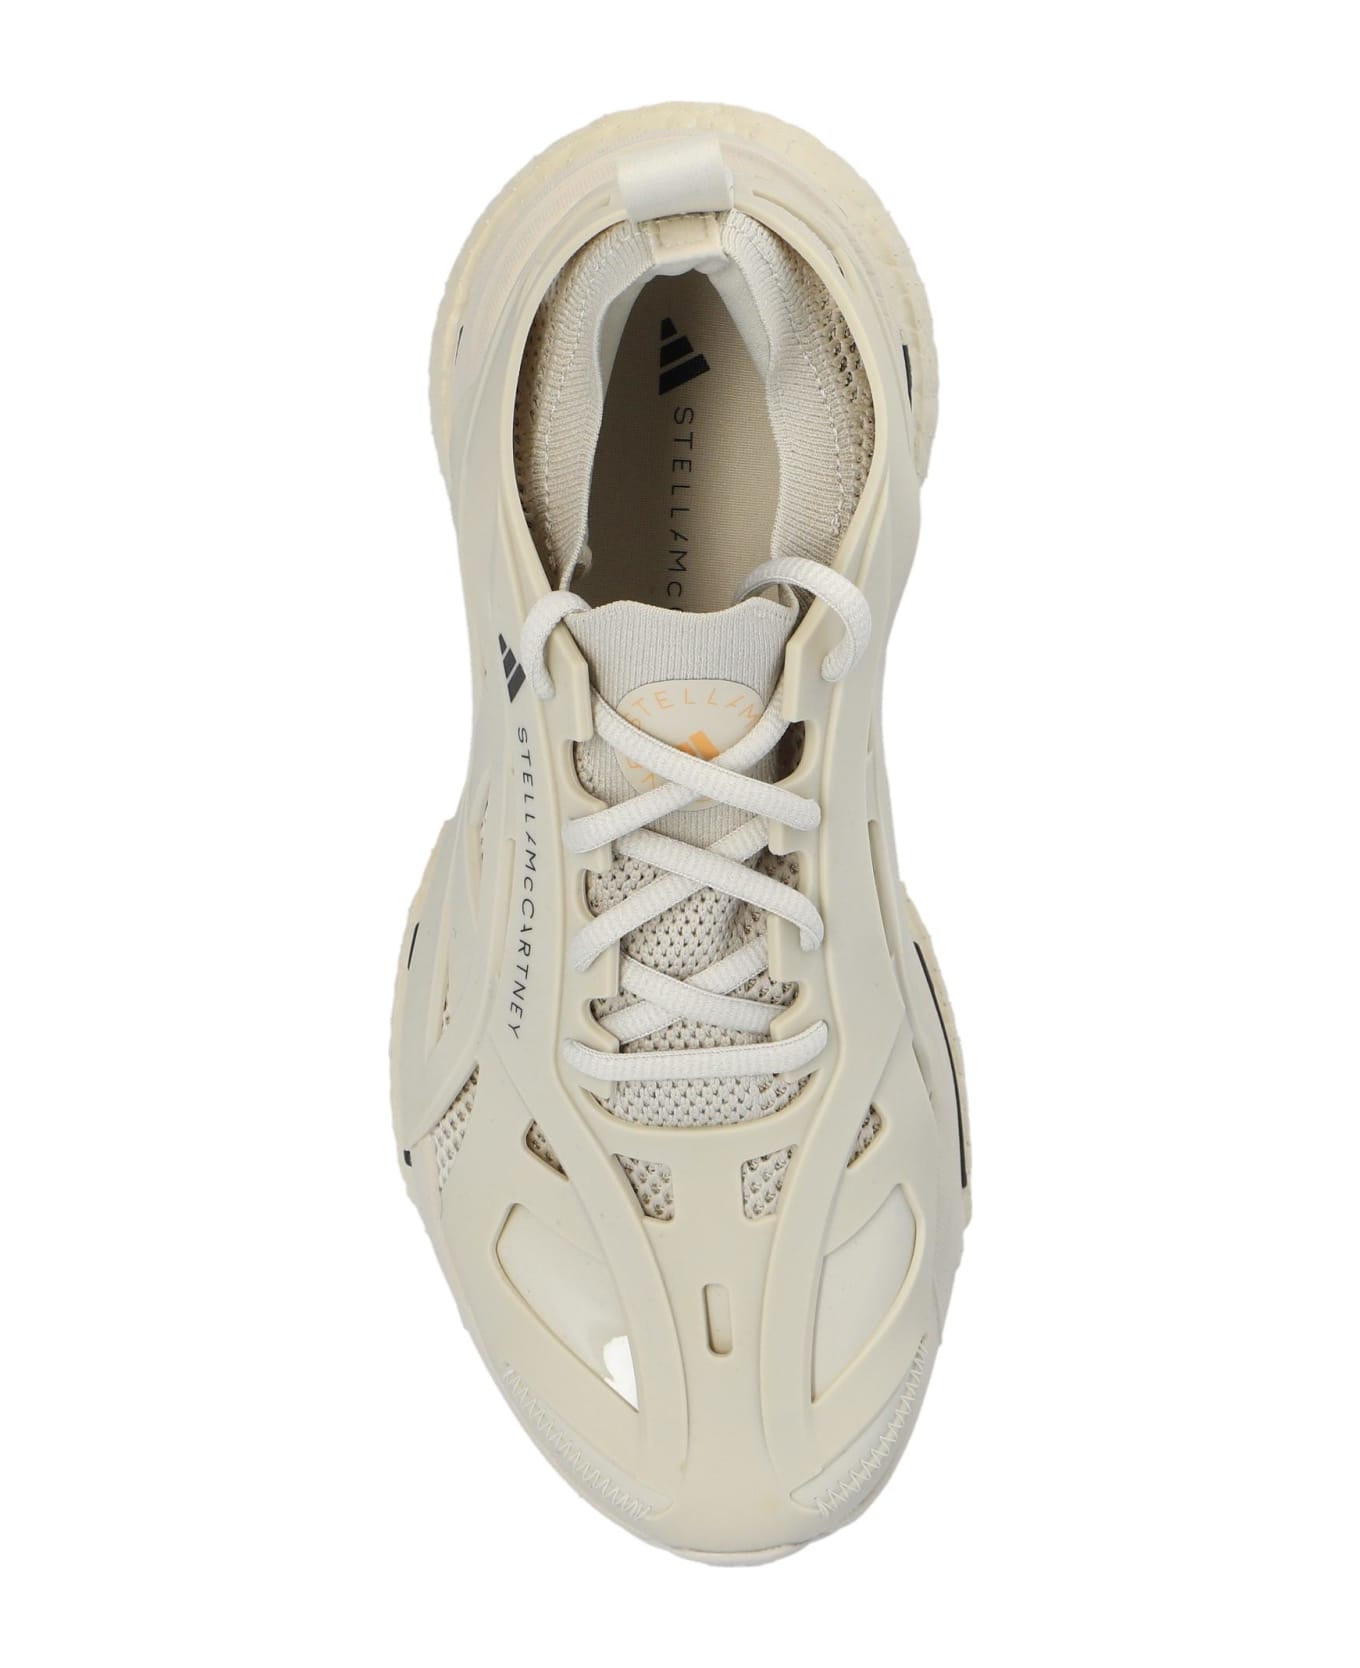 Adidas by Stella McCartney 'solarglide' Sneakers スニーカー